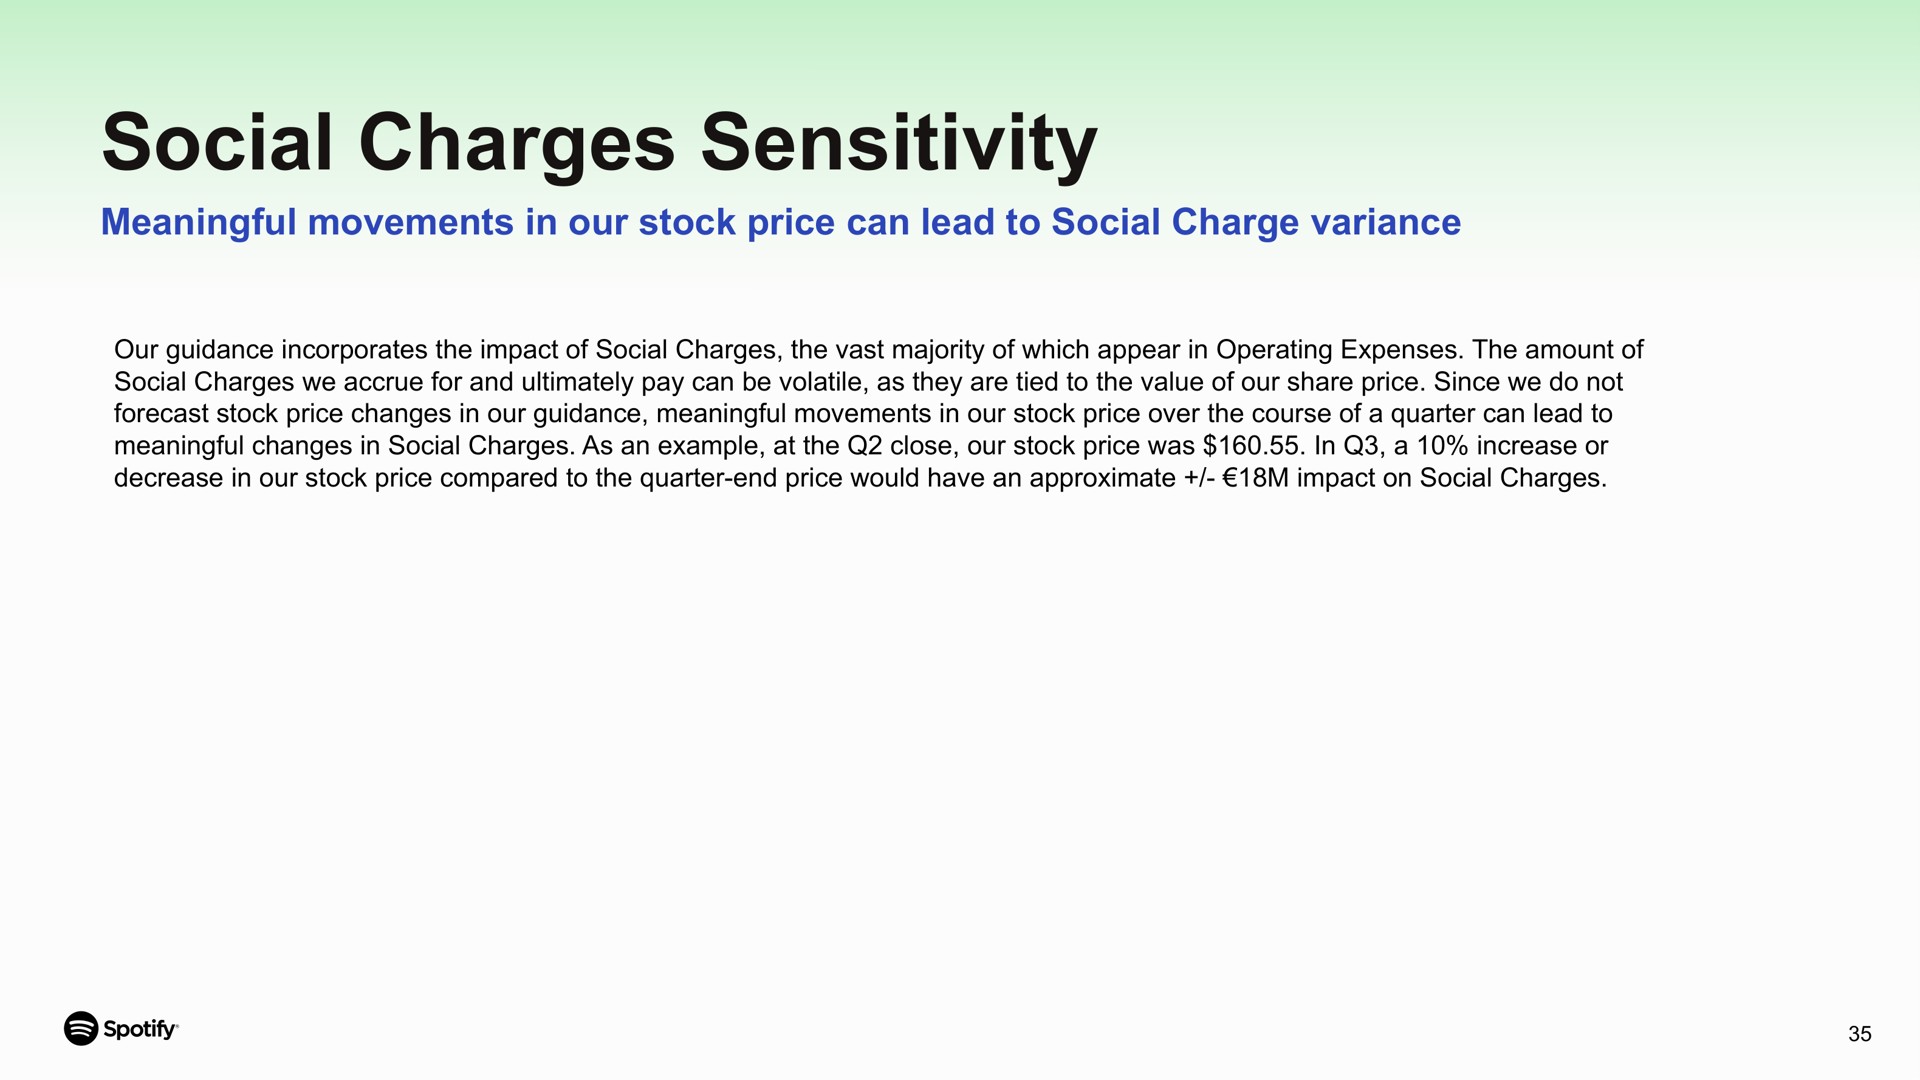 social charges sensitivity meaningful movements in our stock price can lead to social charge variance changes as an example at the close was a increase or | Spotify